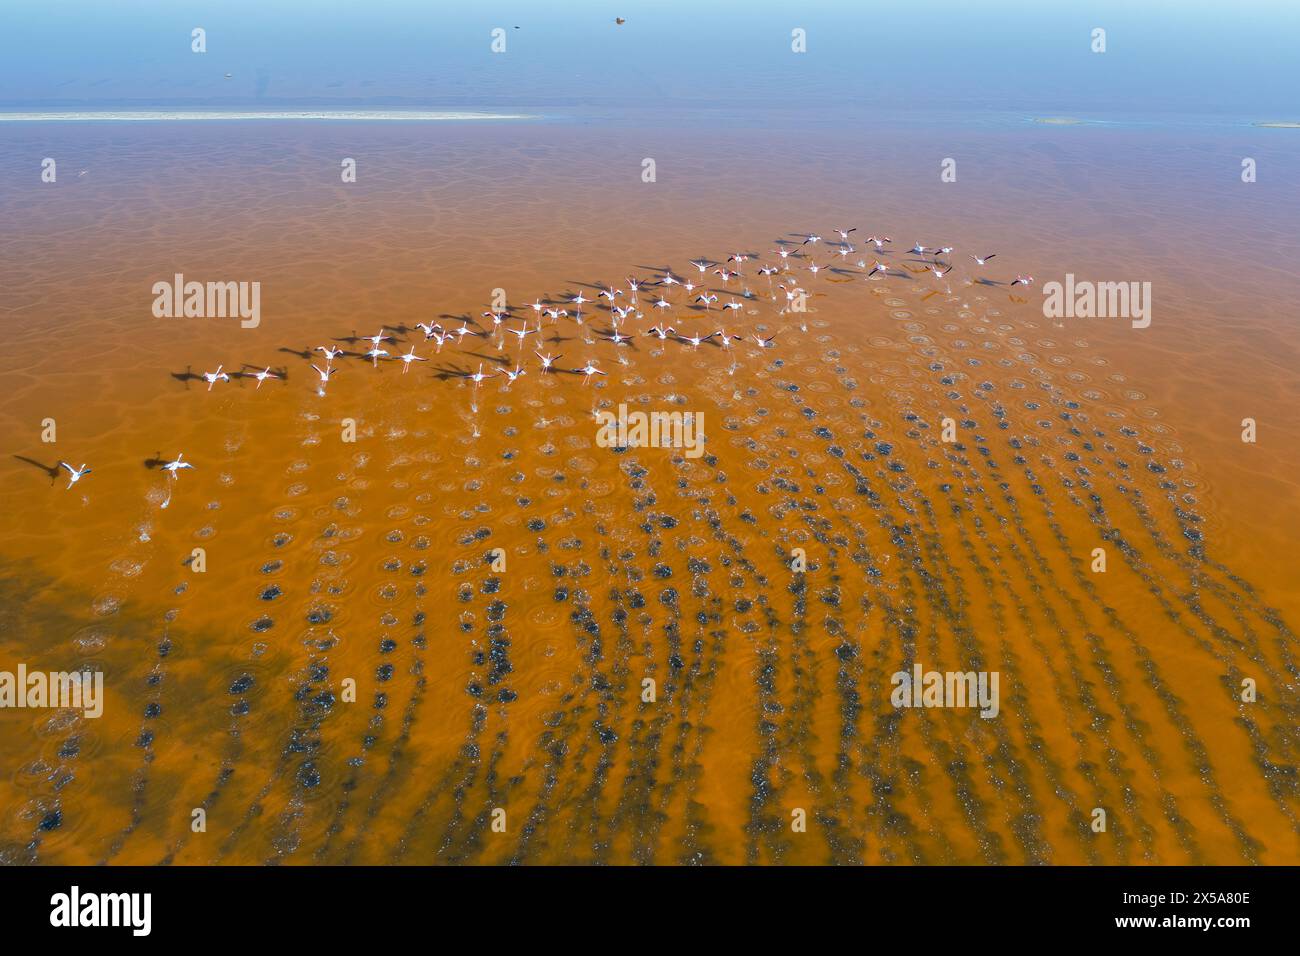 Flock of flamingos captured mid-flight above a brown-colored lake with visible patterns in the water Stock Photo